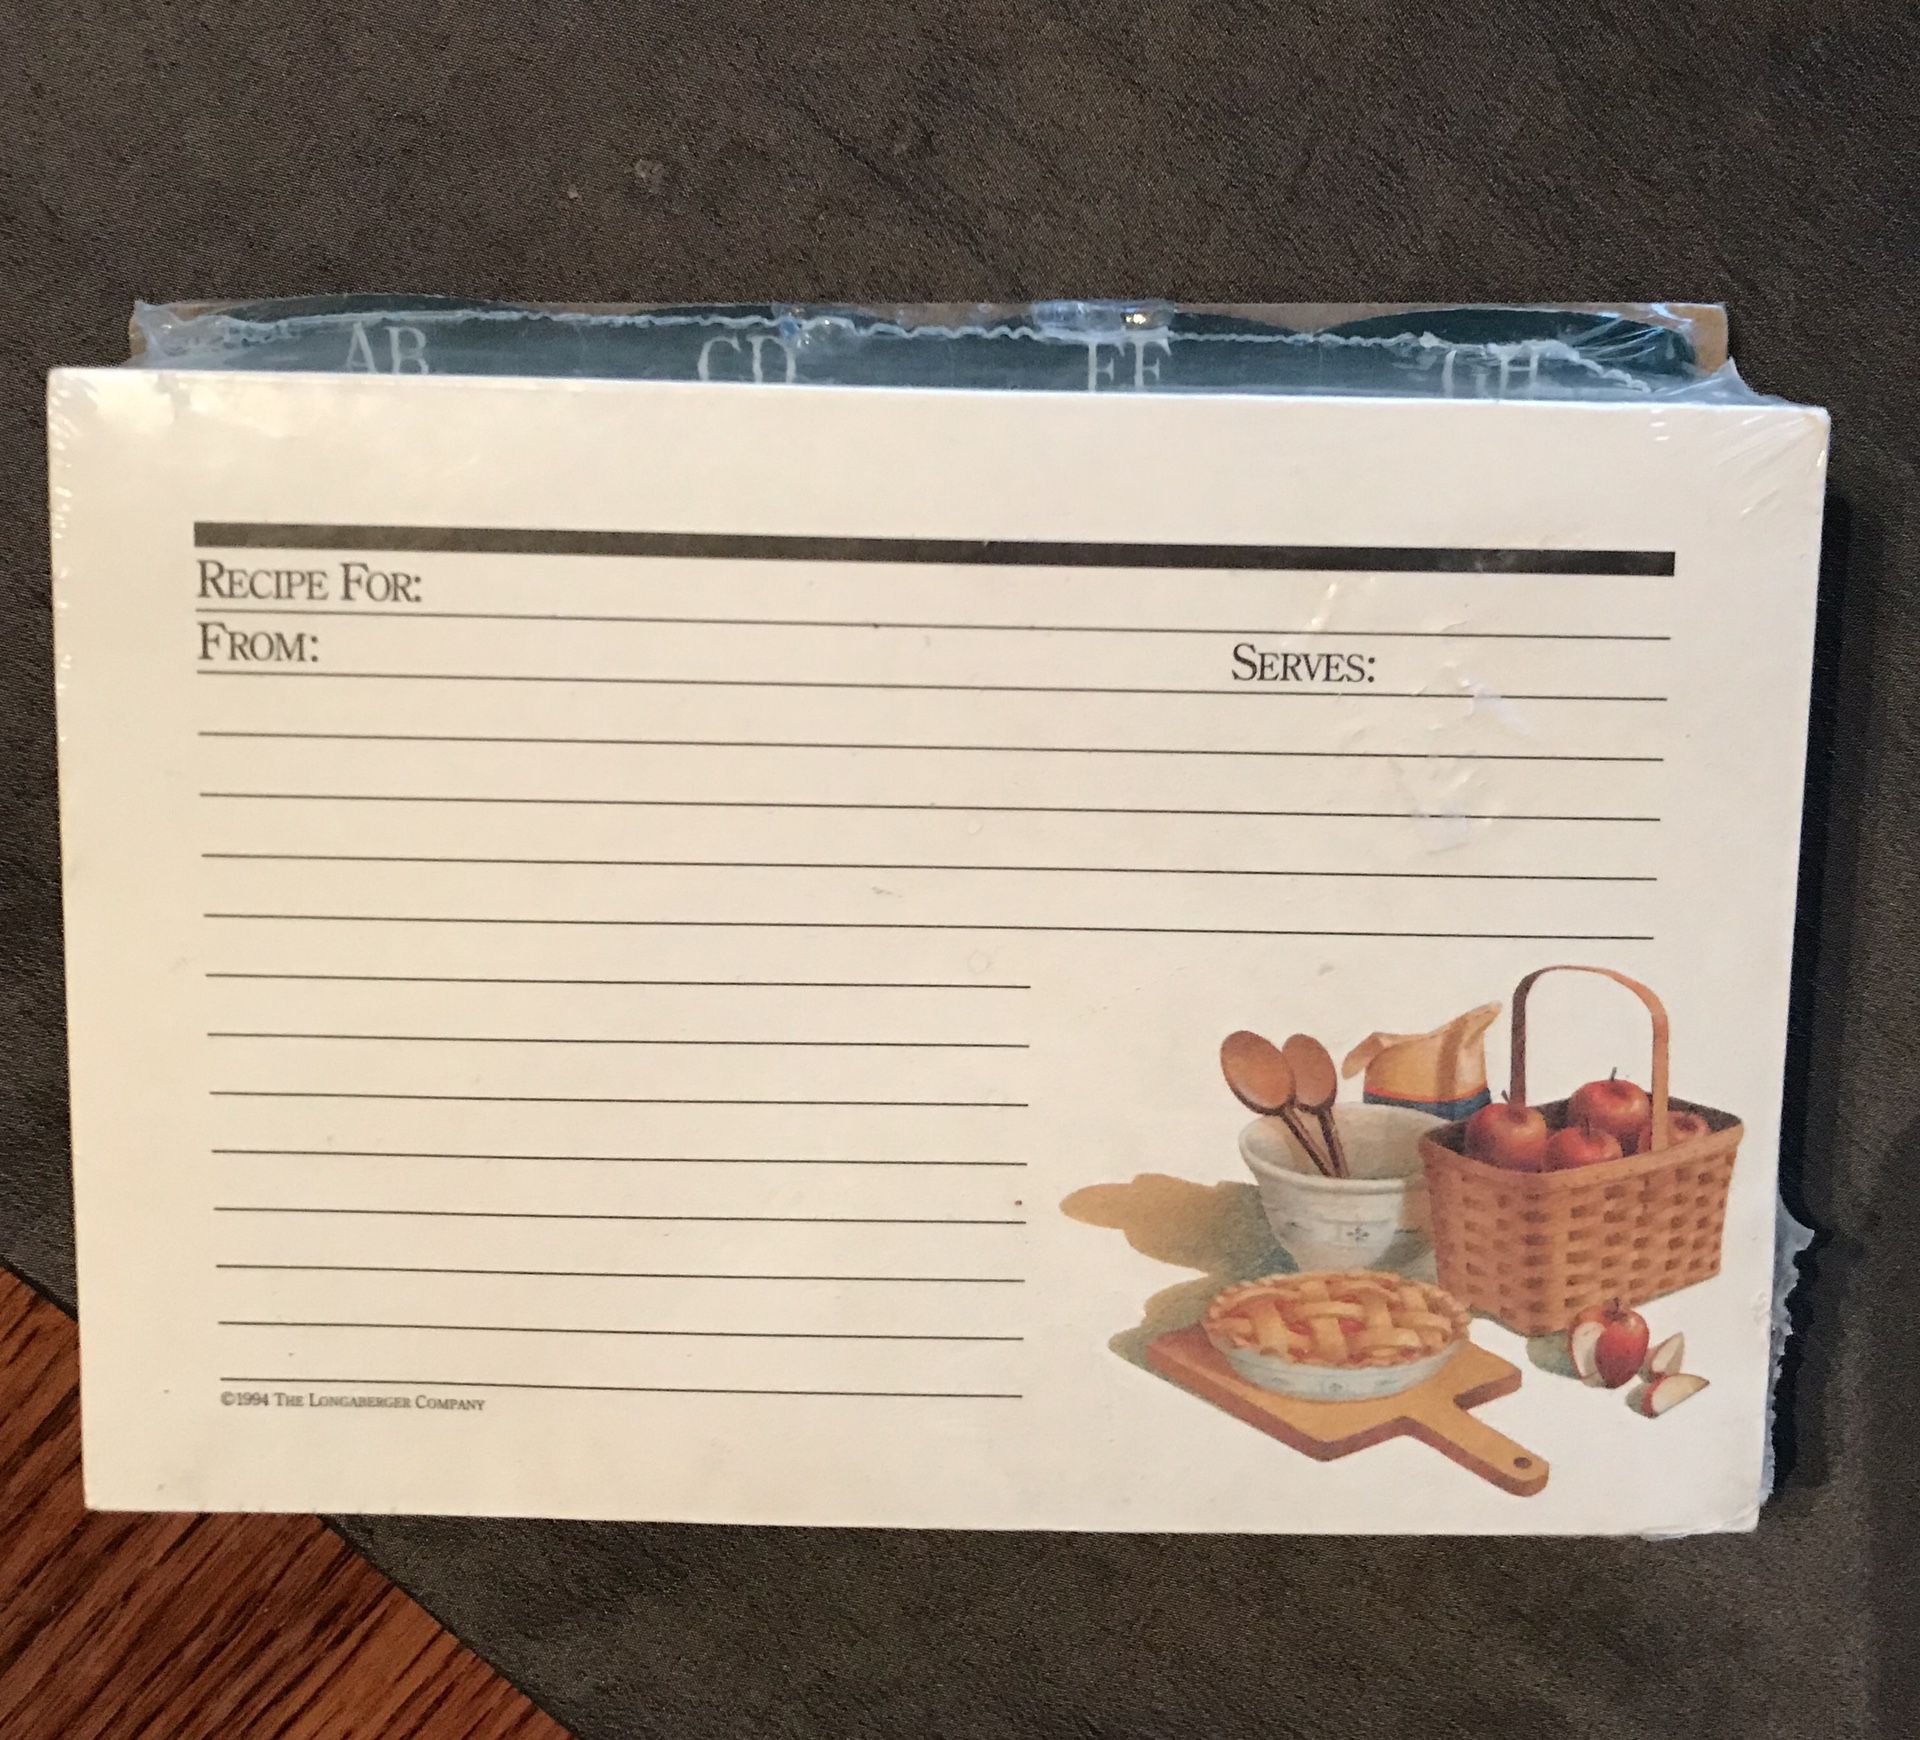 NEW 50 Longaberger Recipe Cards with Dividers 4 x6